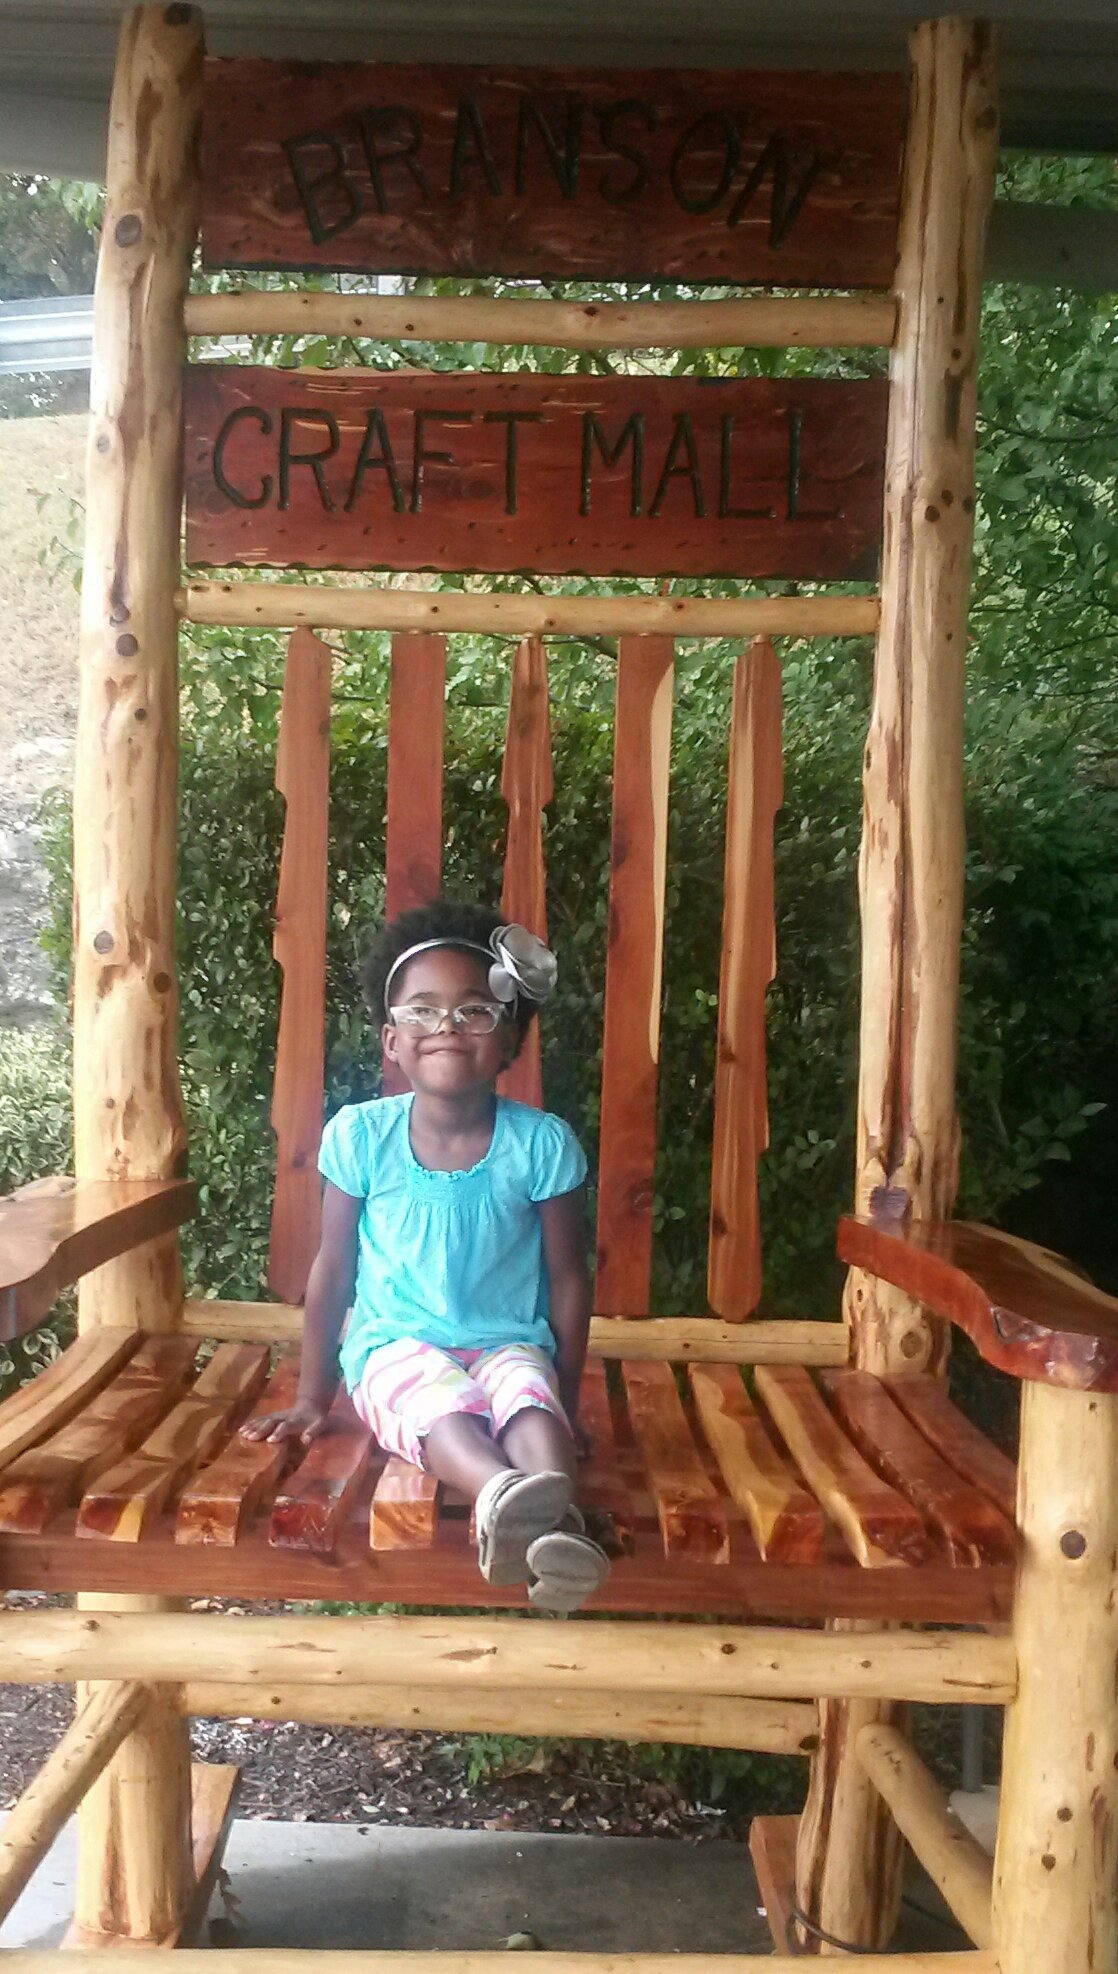 It really was a huge rocking chair.